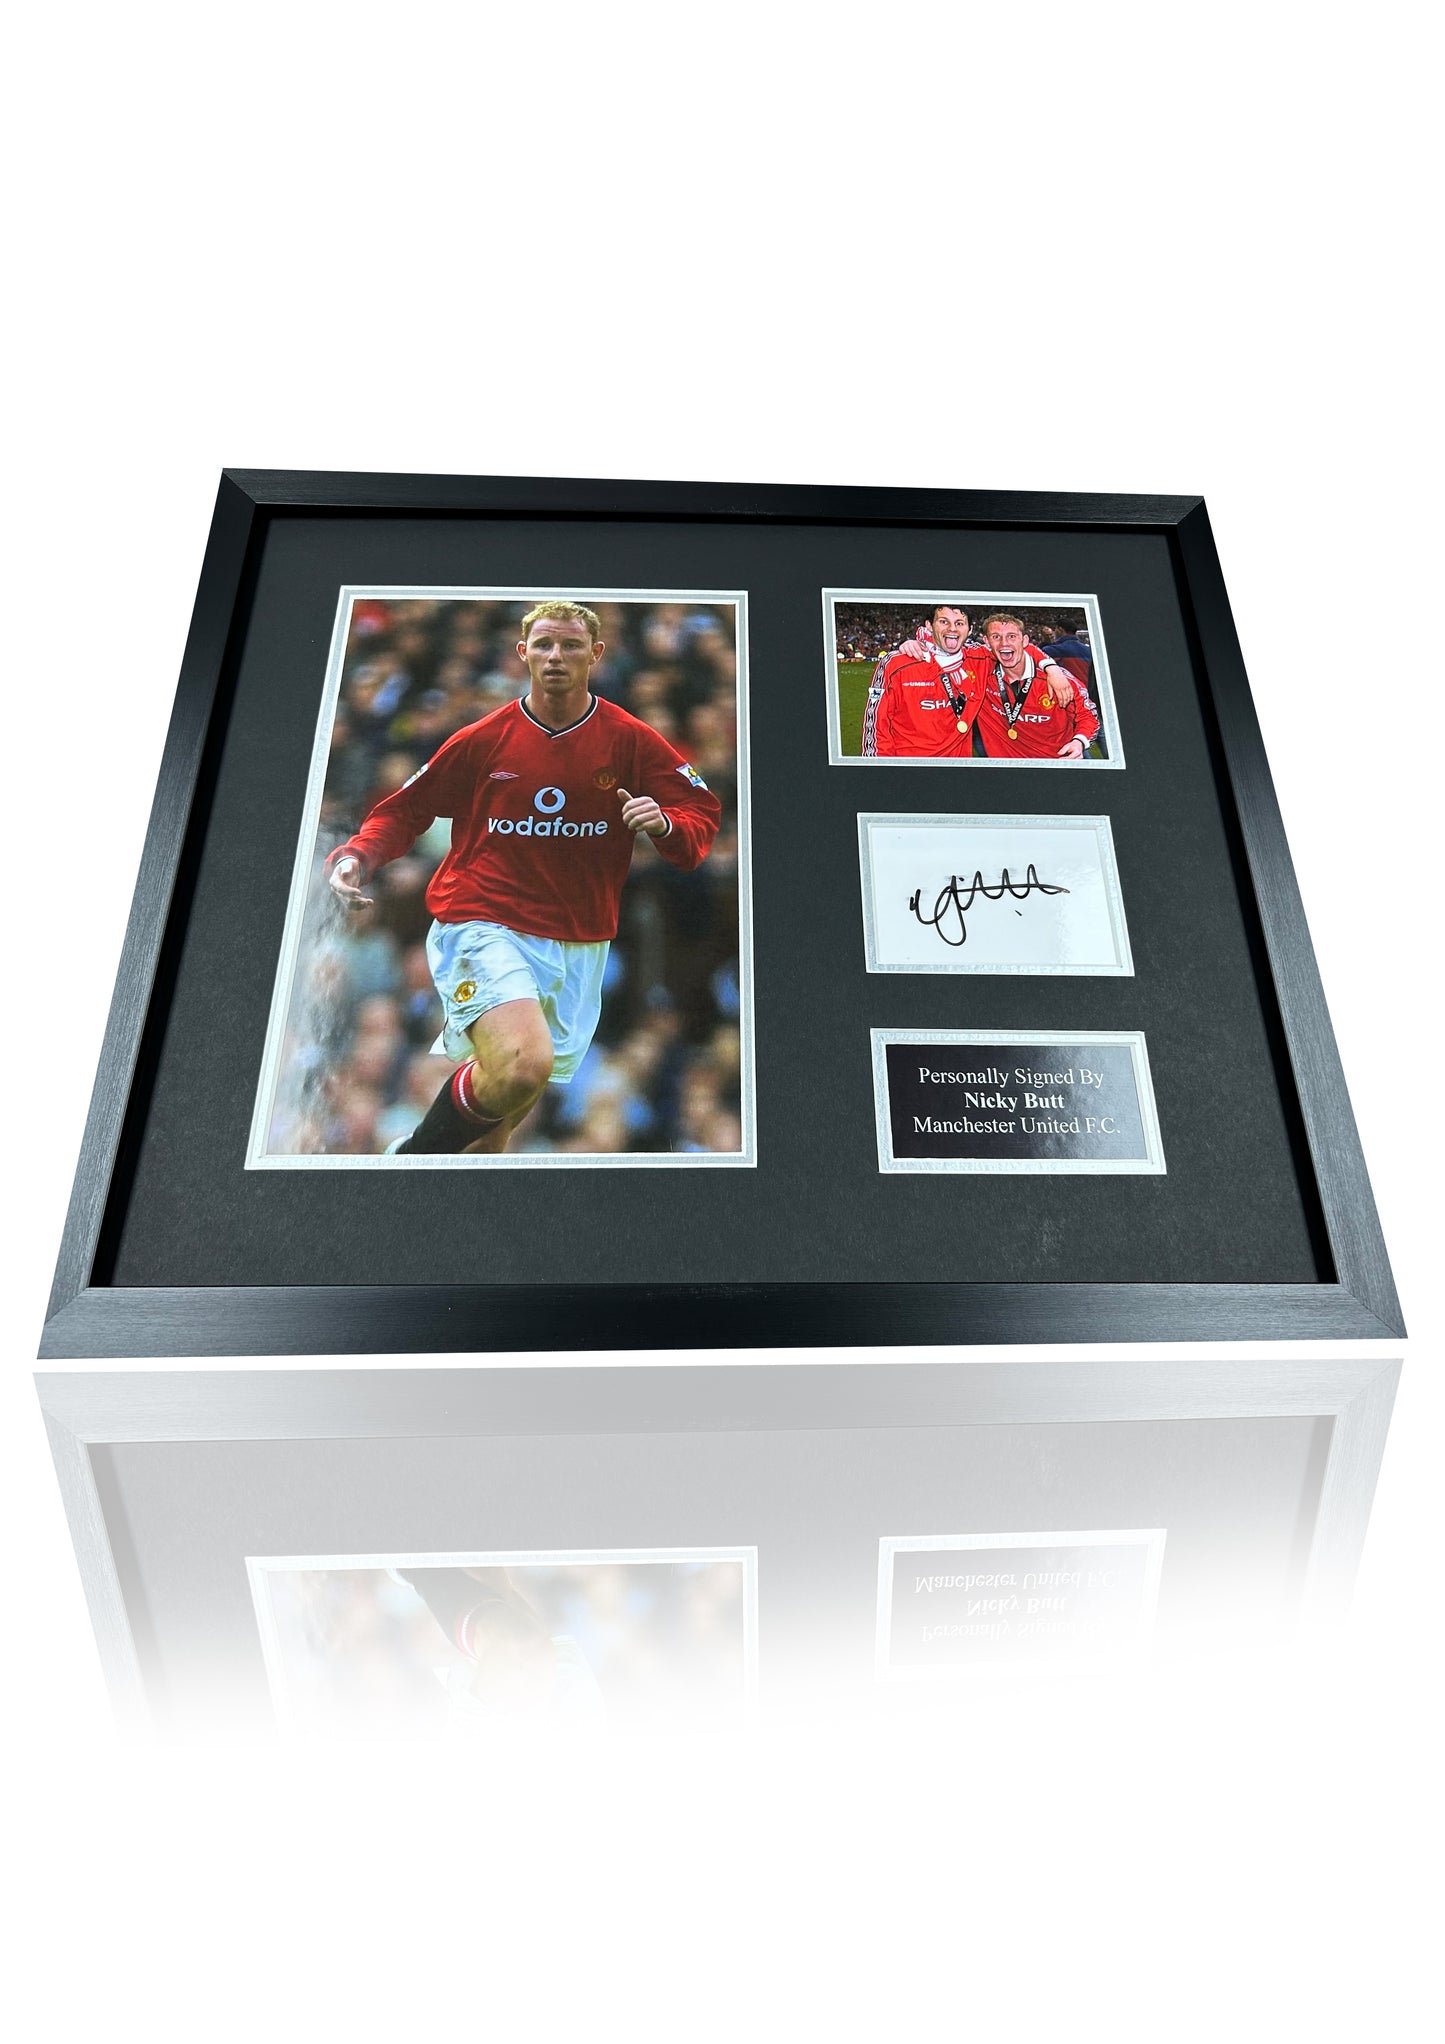 Nicky Butt signed framed photo card montage Manchester United